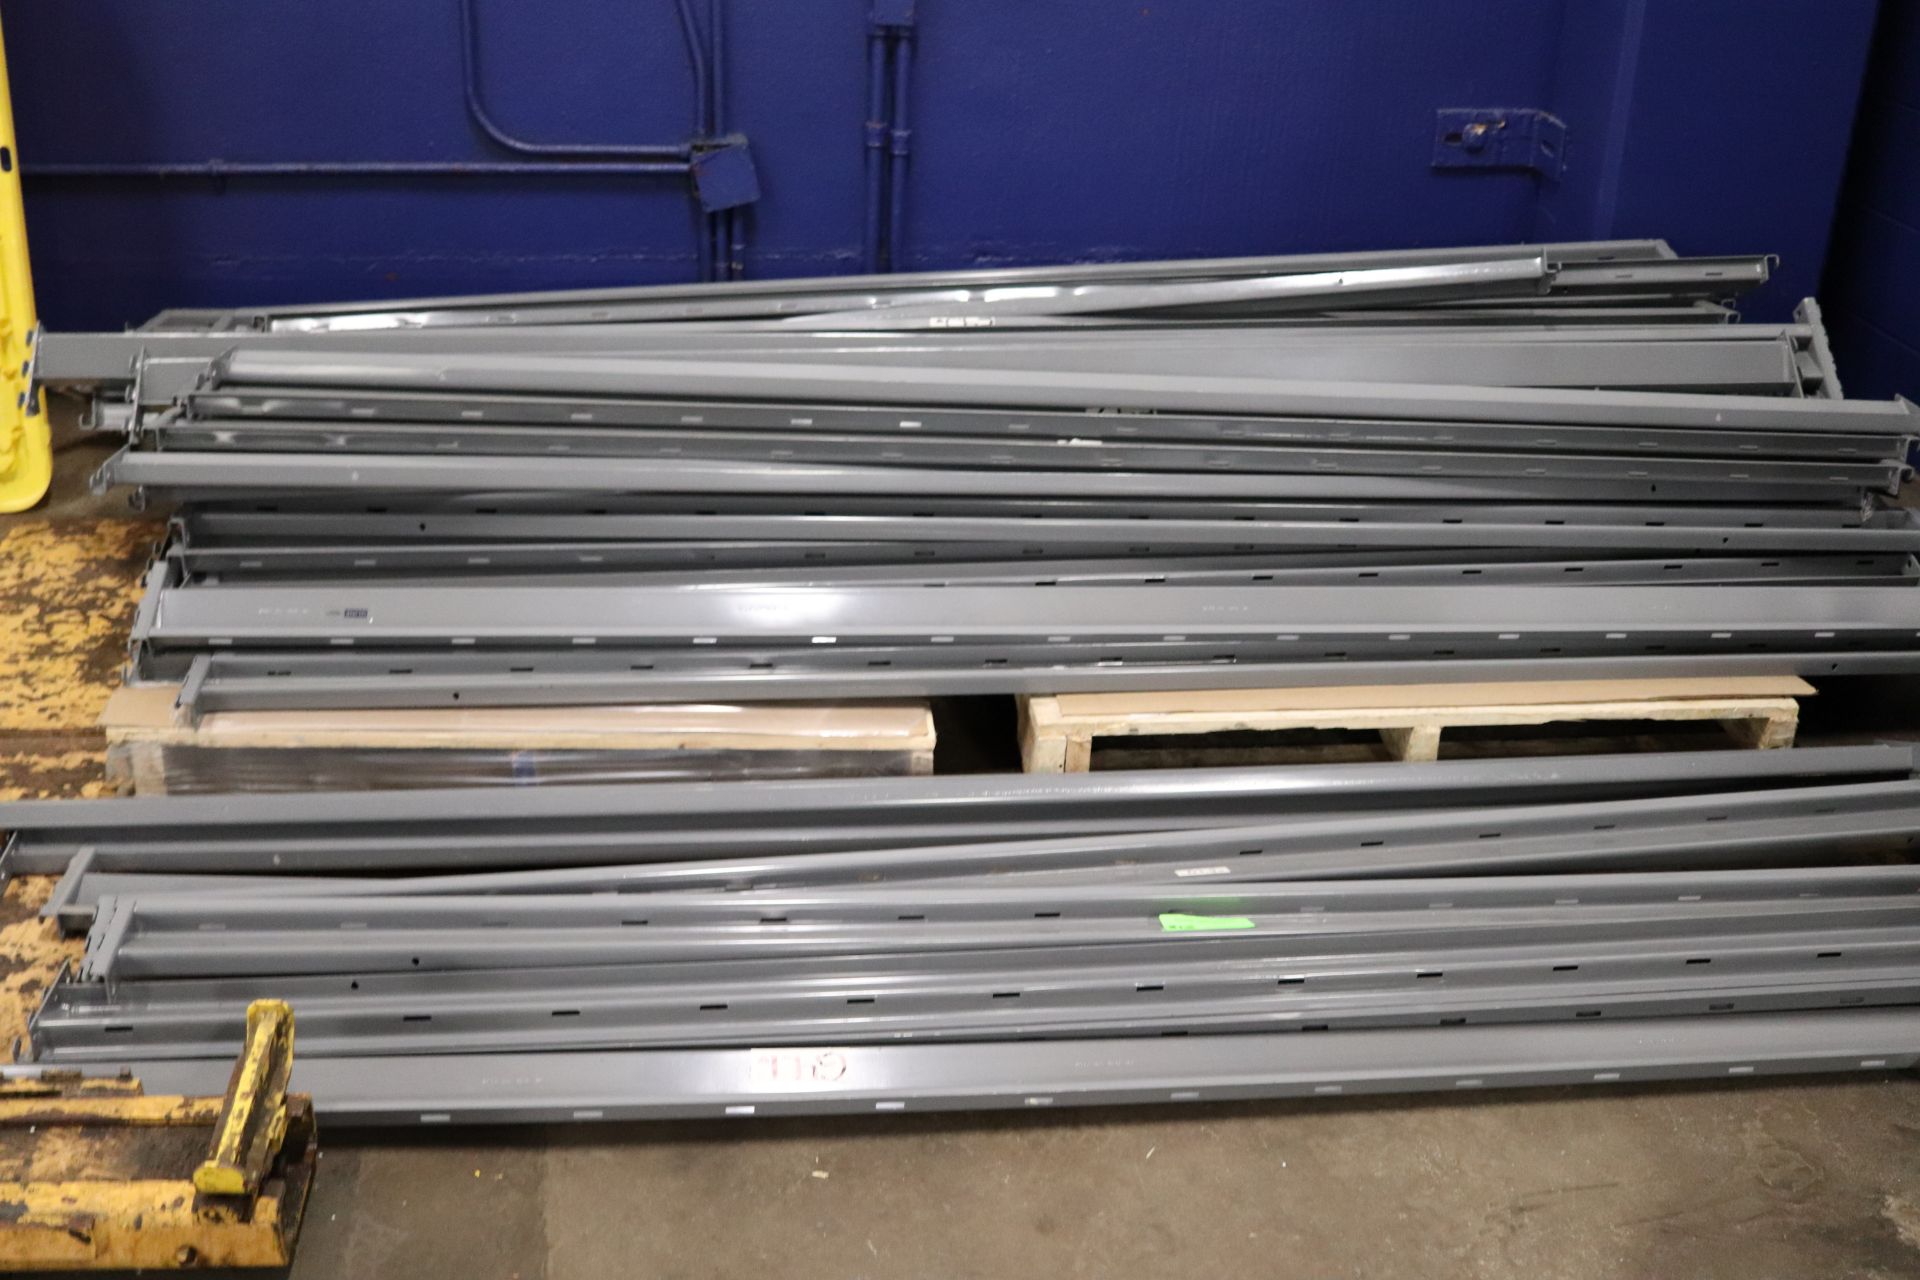 Two pallets of Uline support beams, 72"